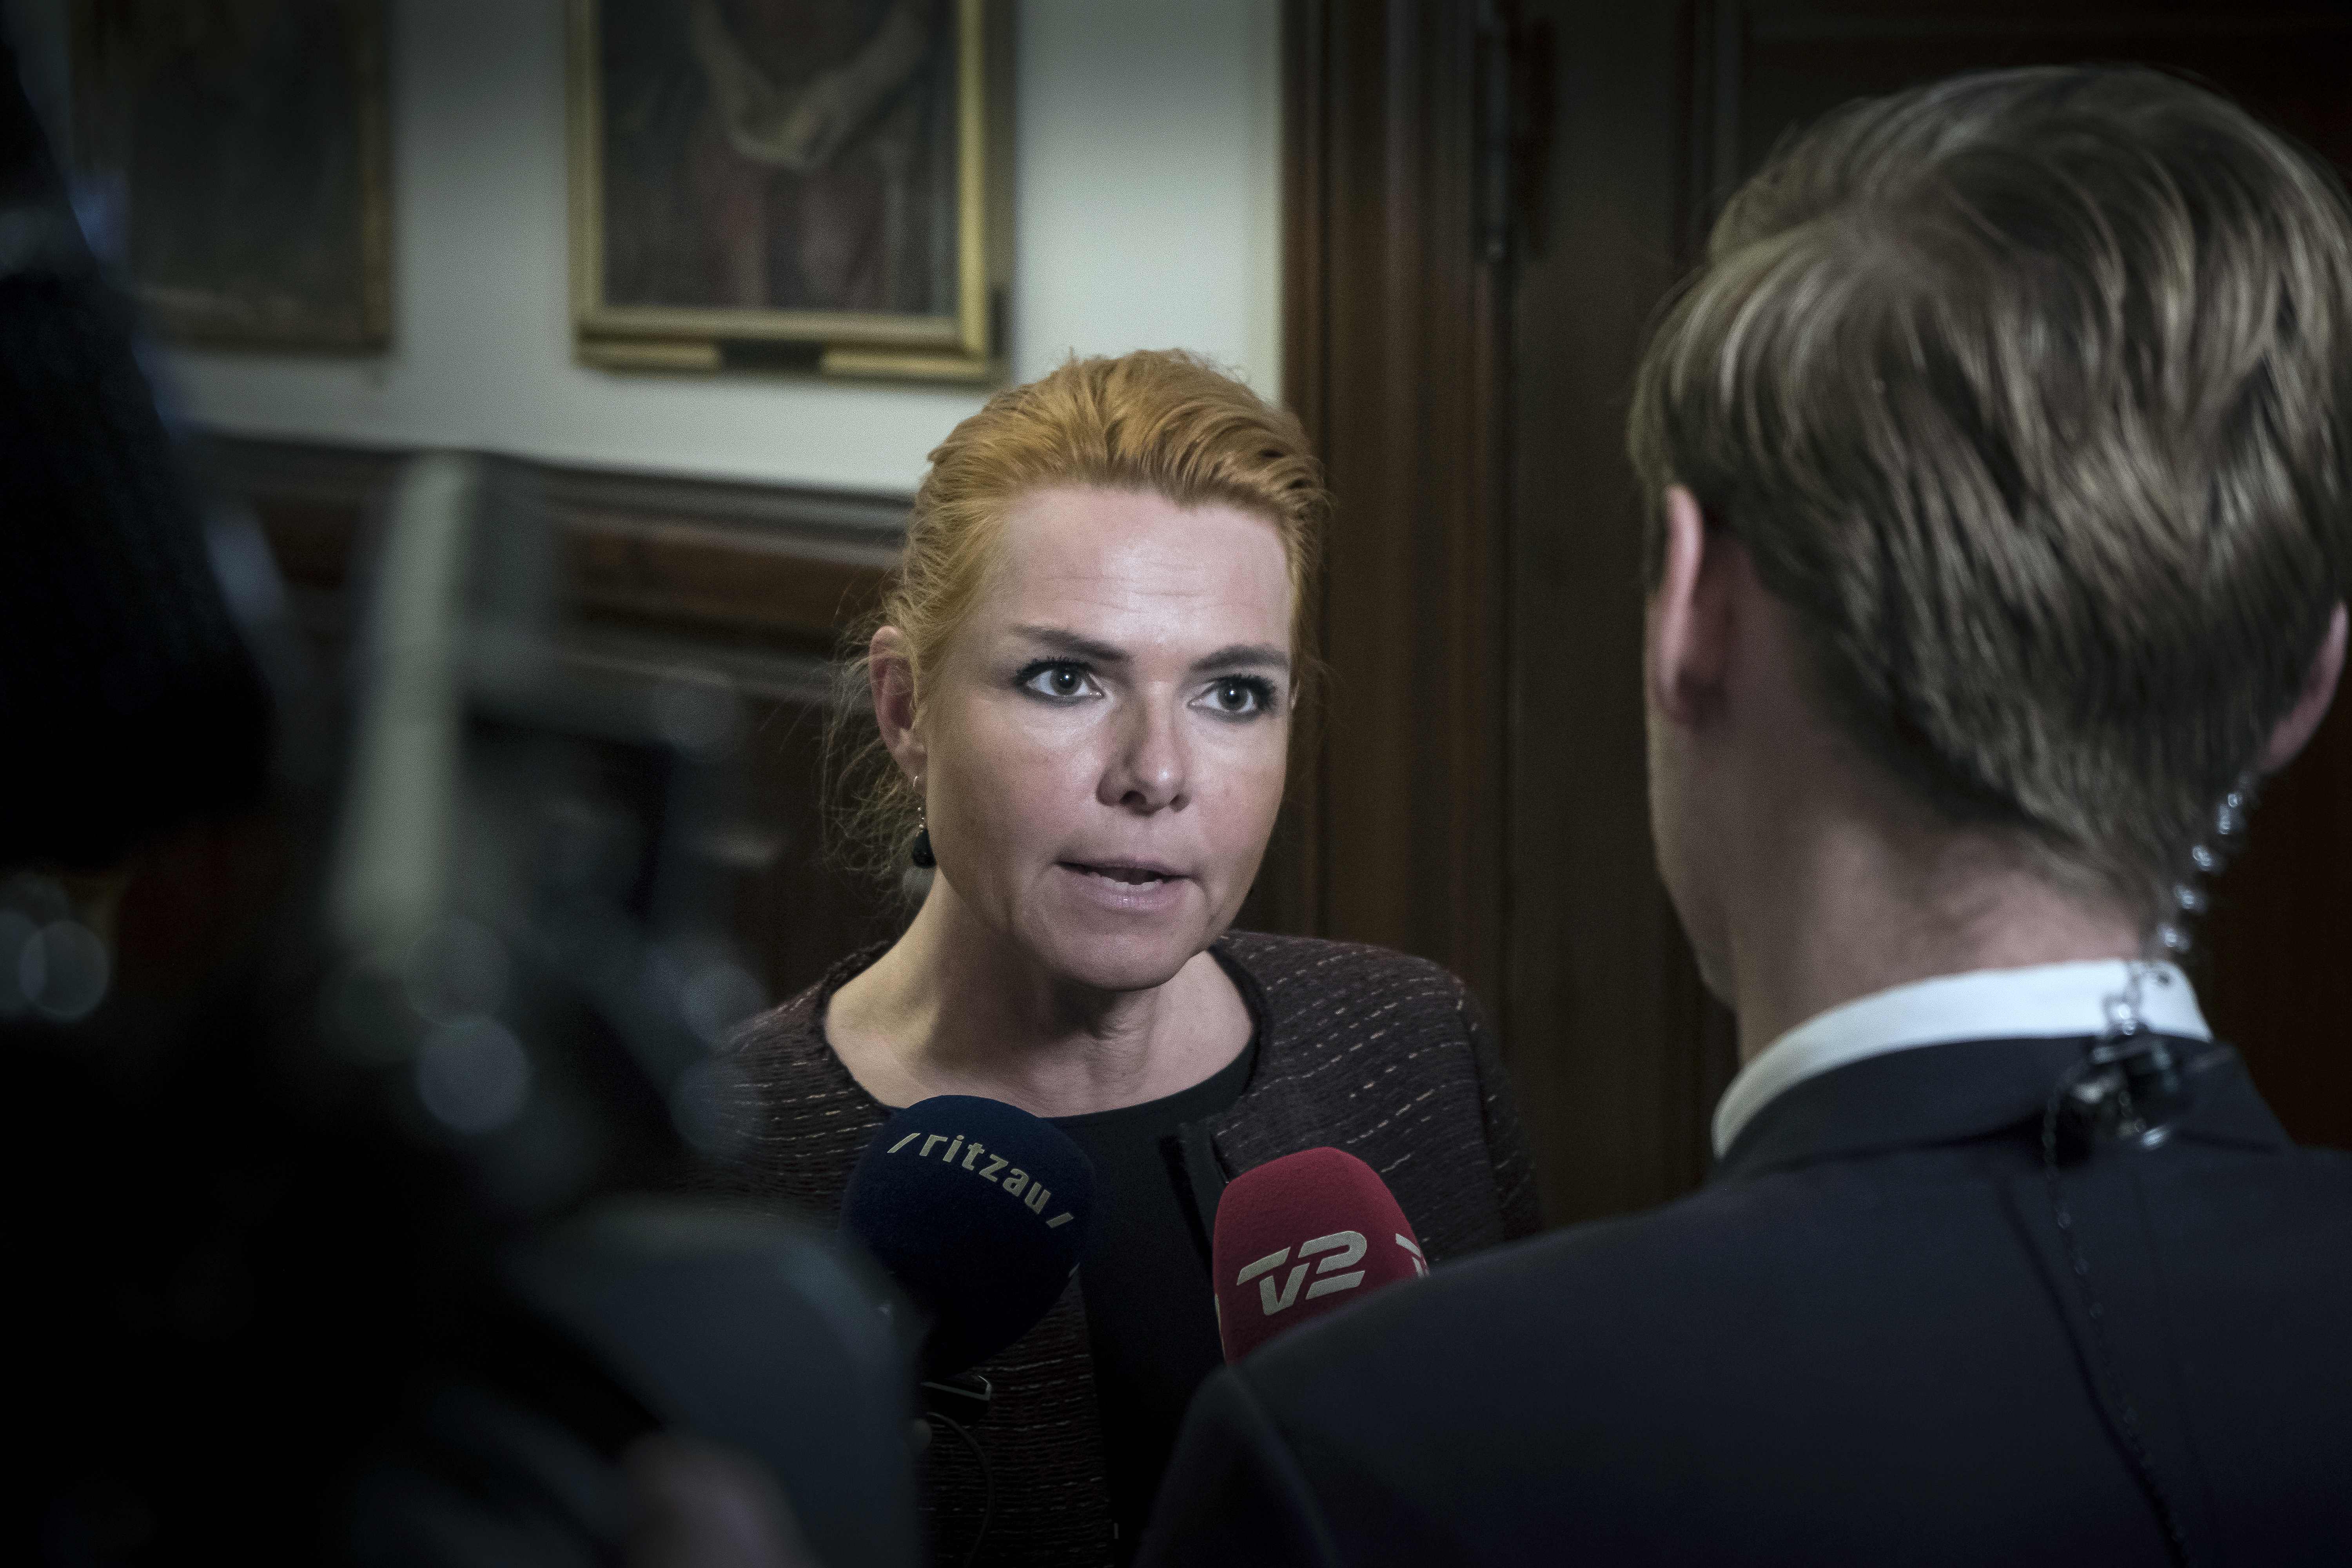 Støjberg sentenced to two months in prison after being found guilty in the Supreme Court